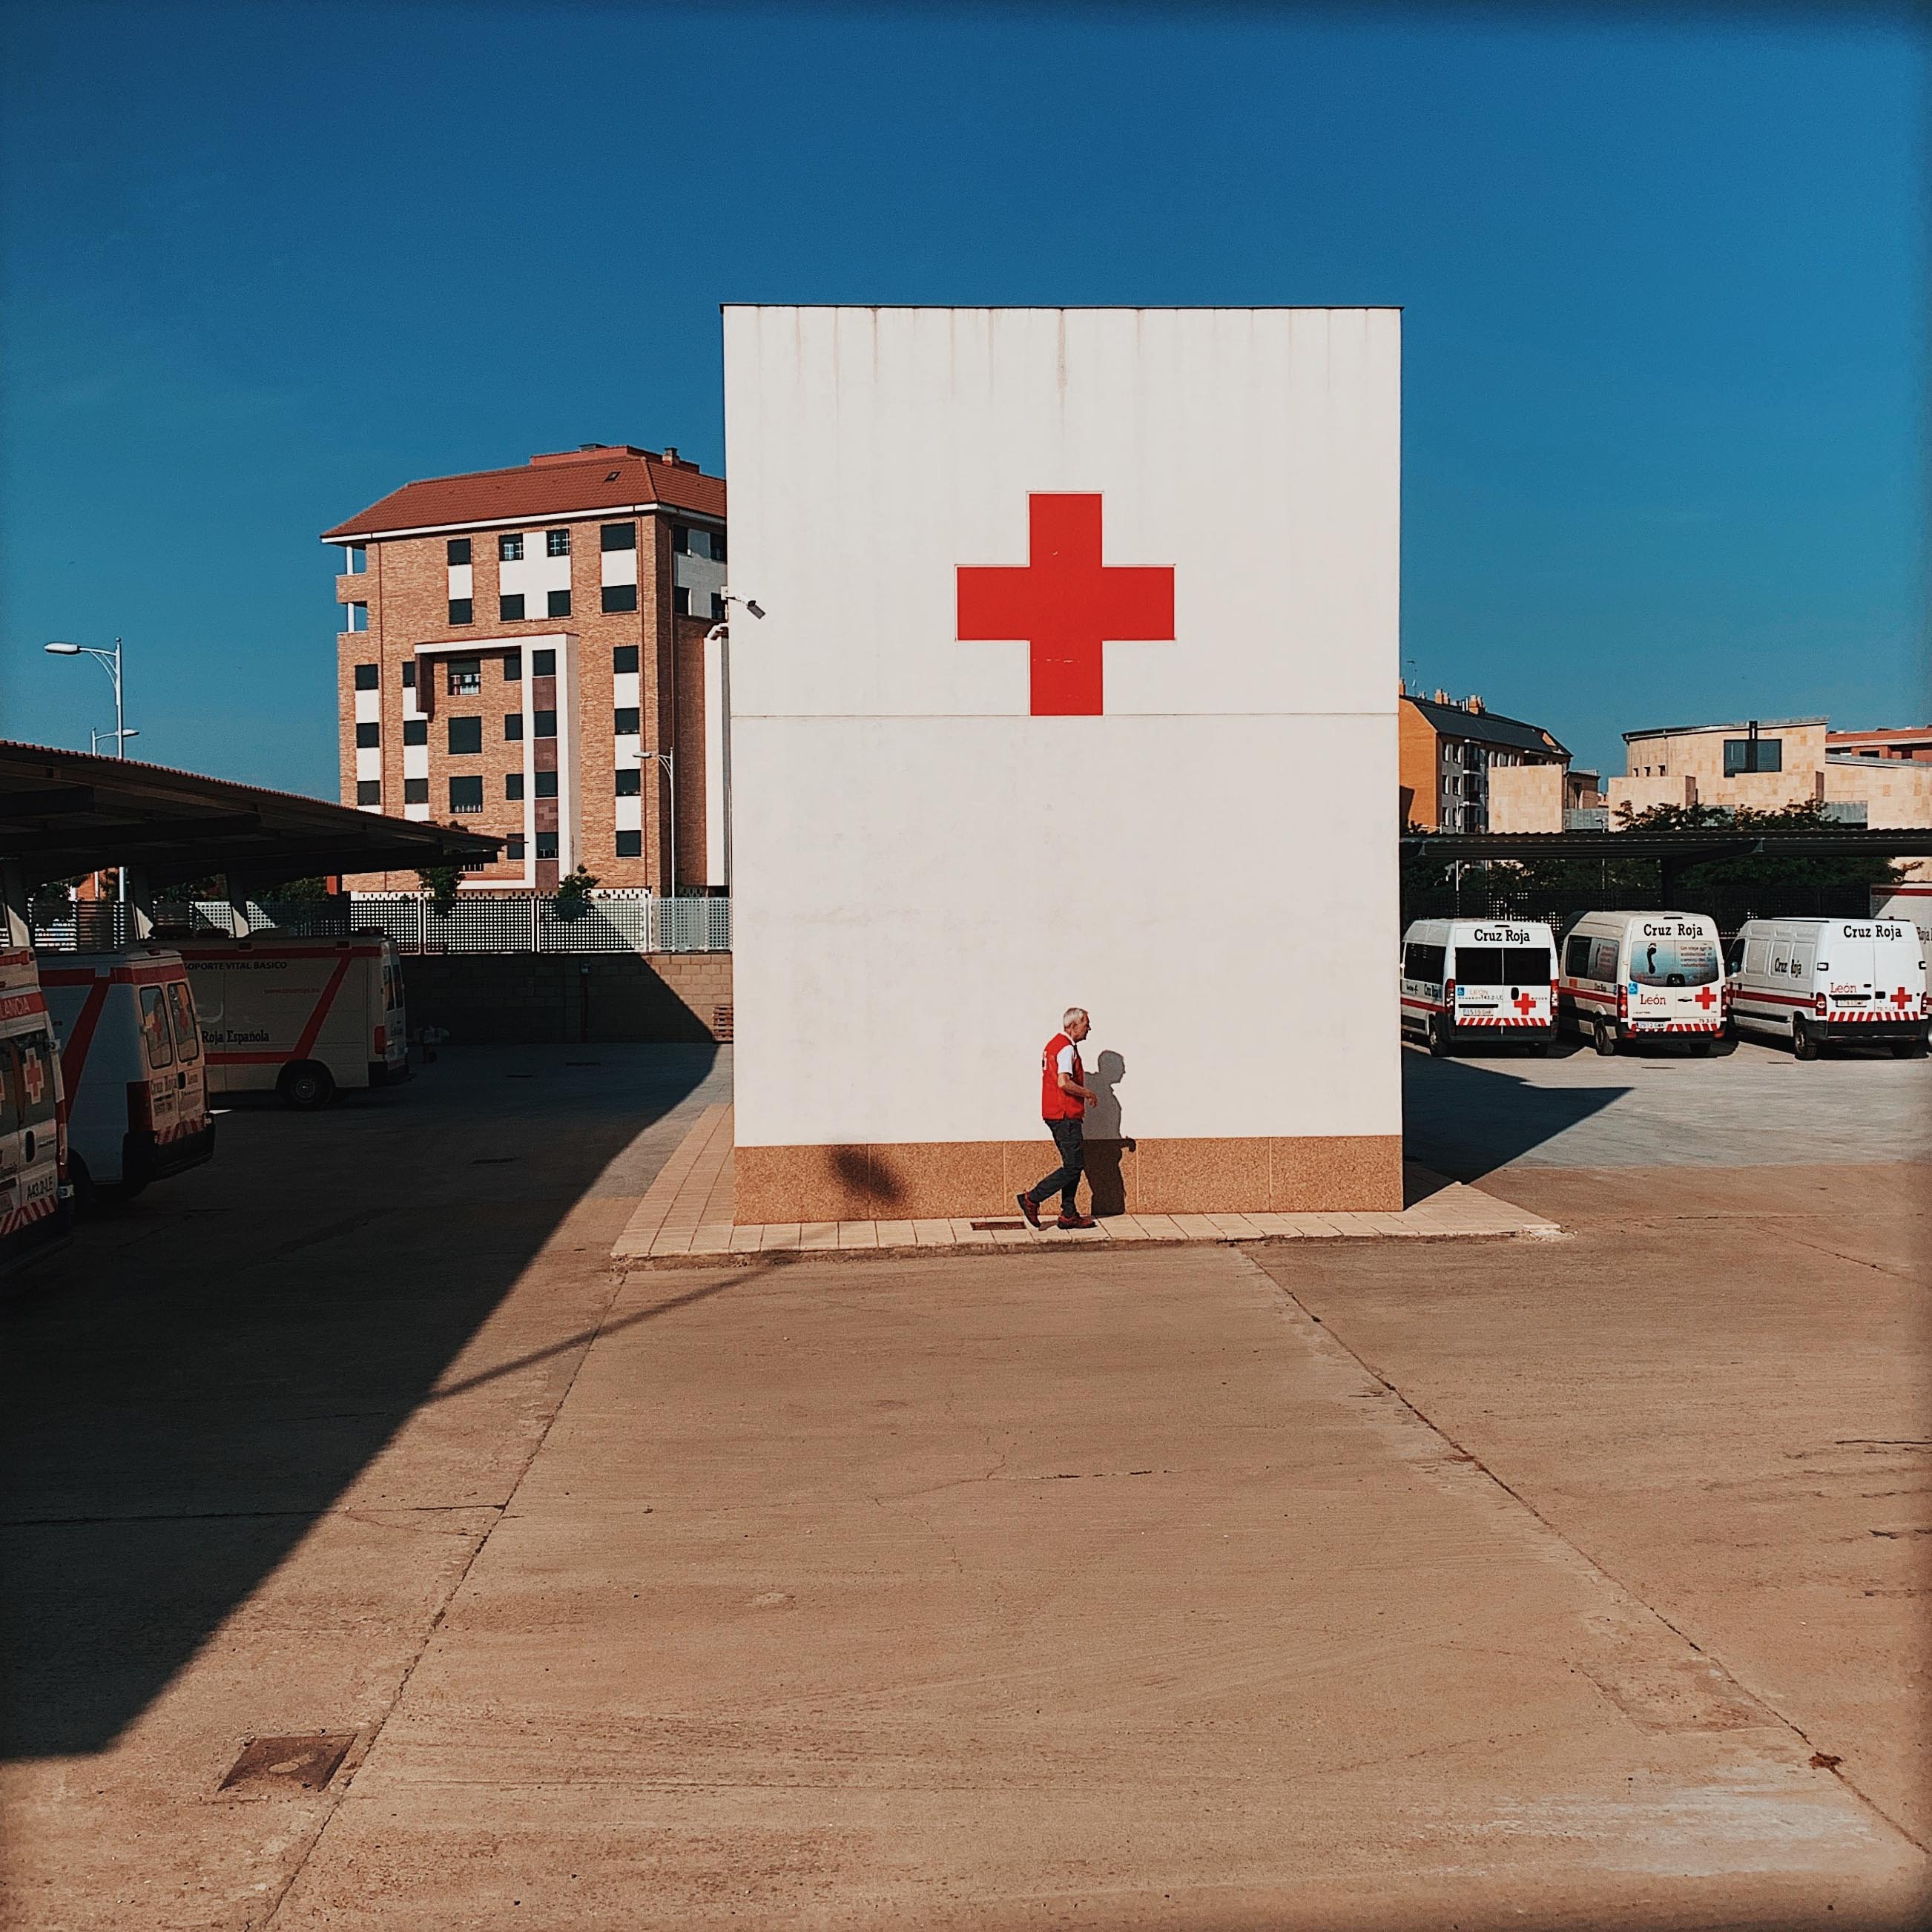 Someone standing in front of a building with a red cross